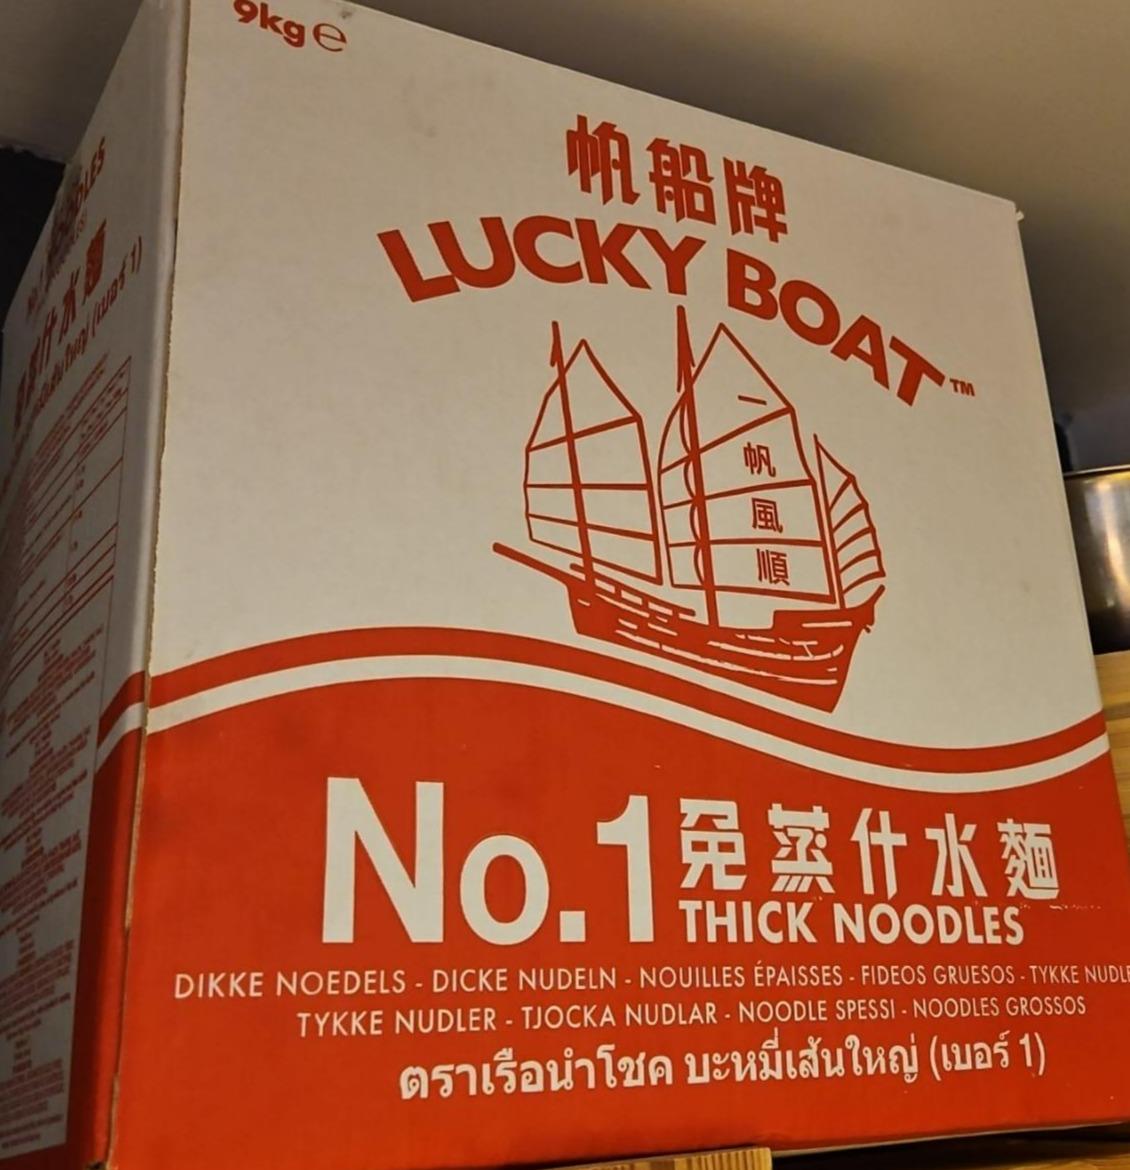 Fotografie - Thick noodles Lucky boat